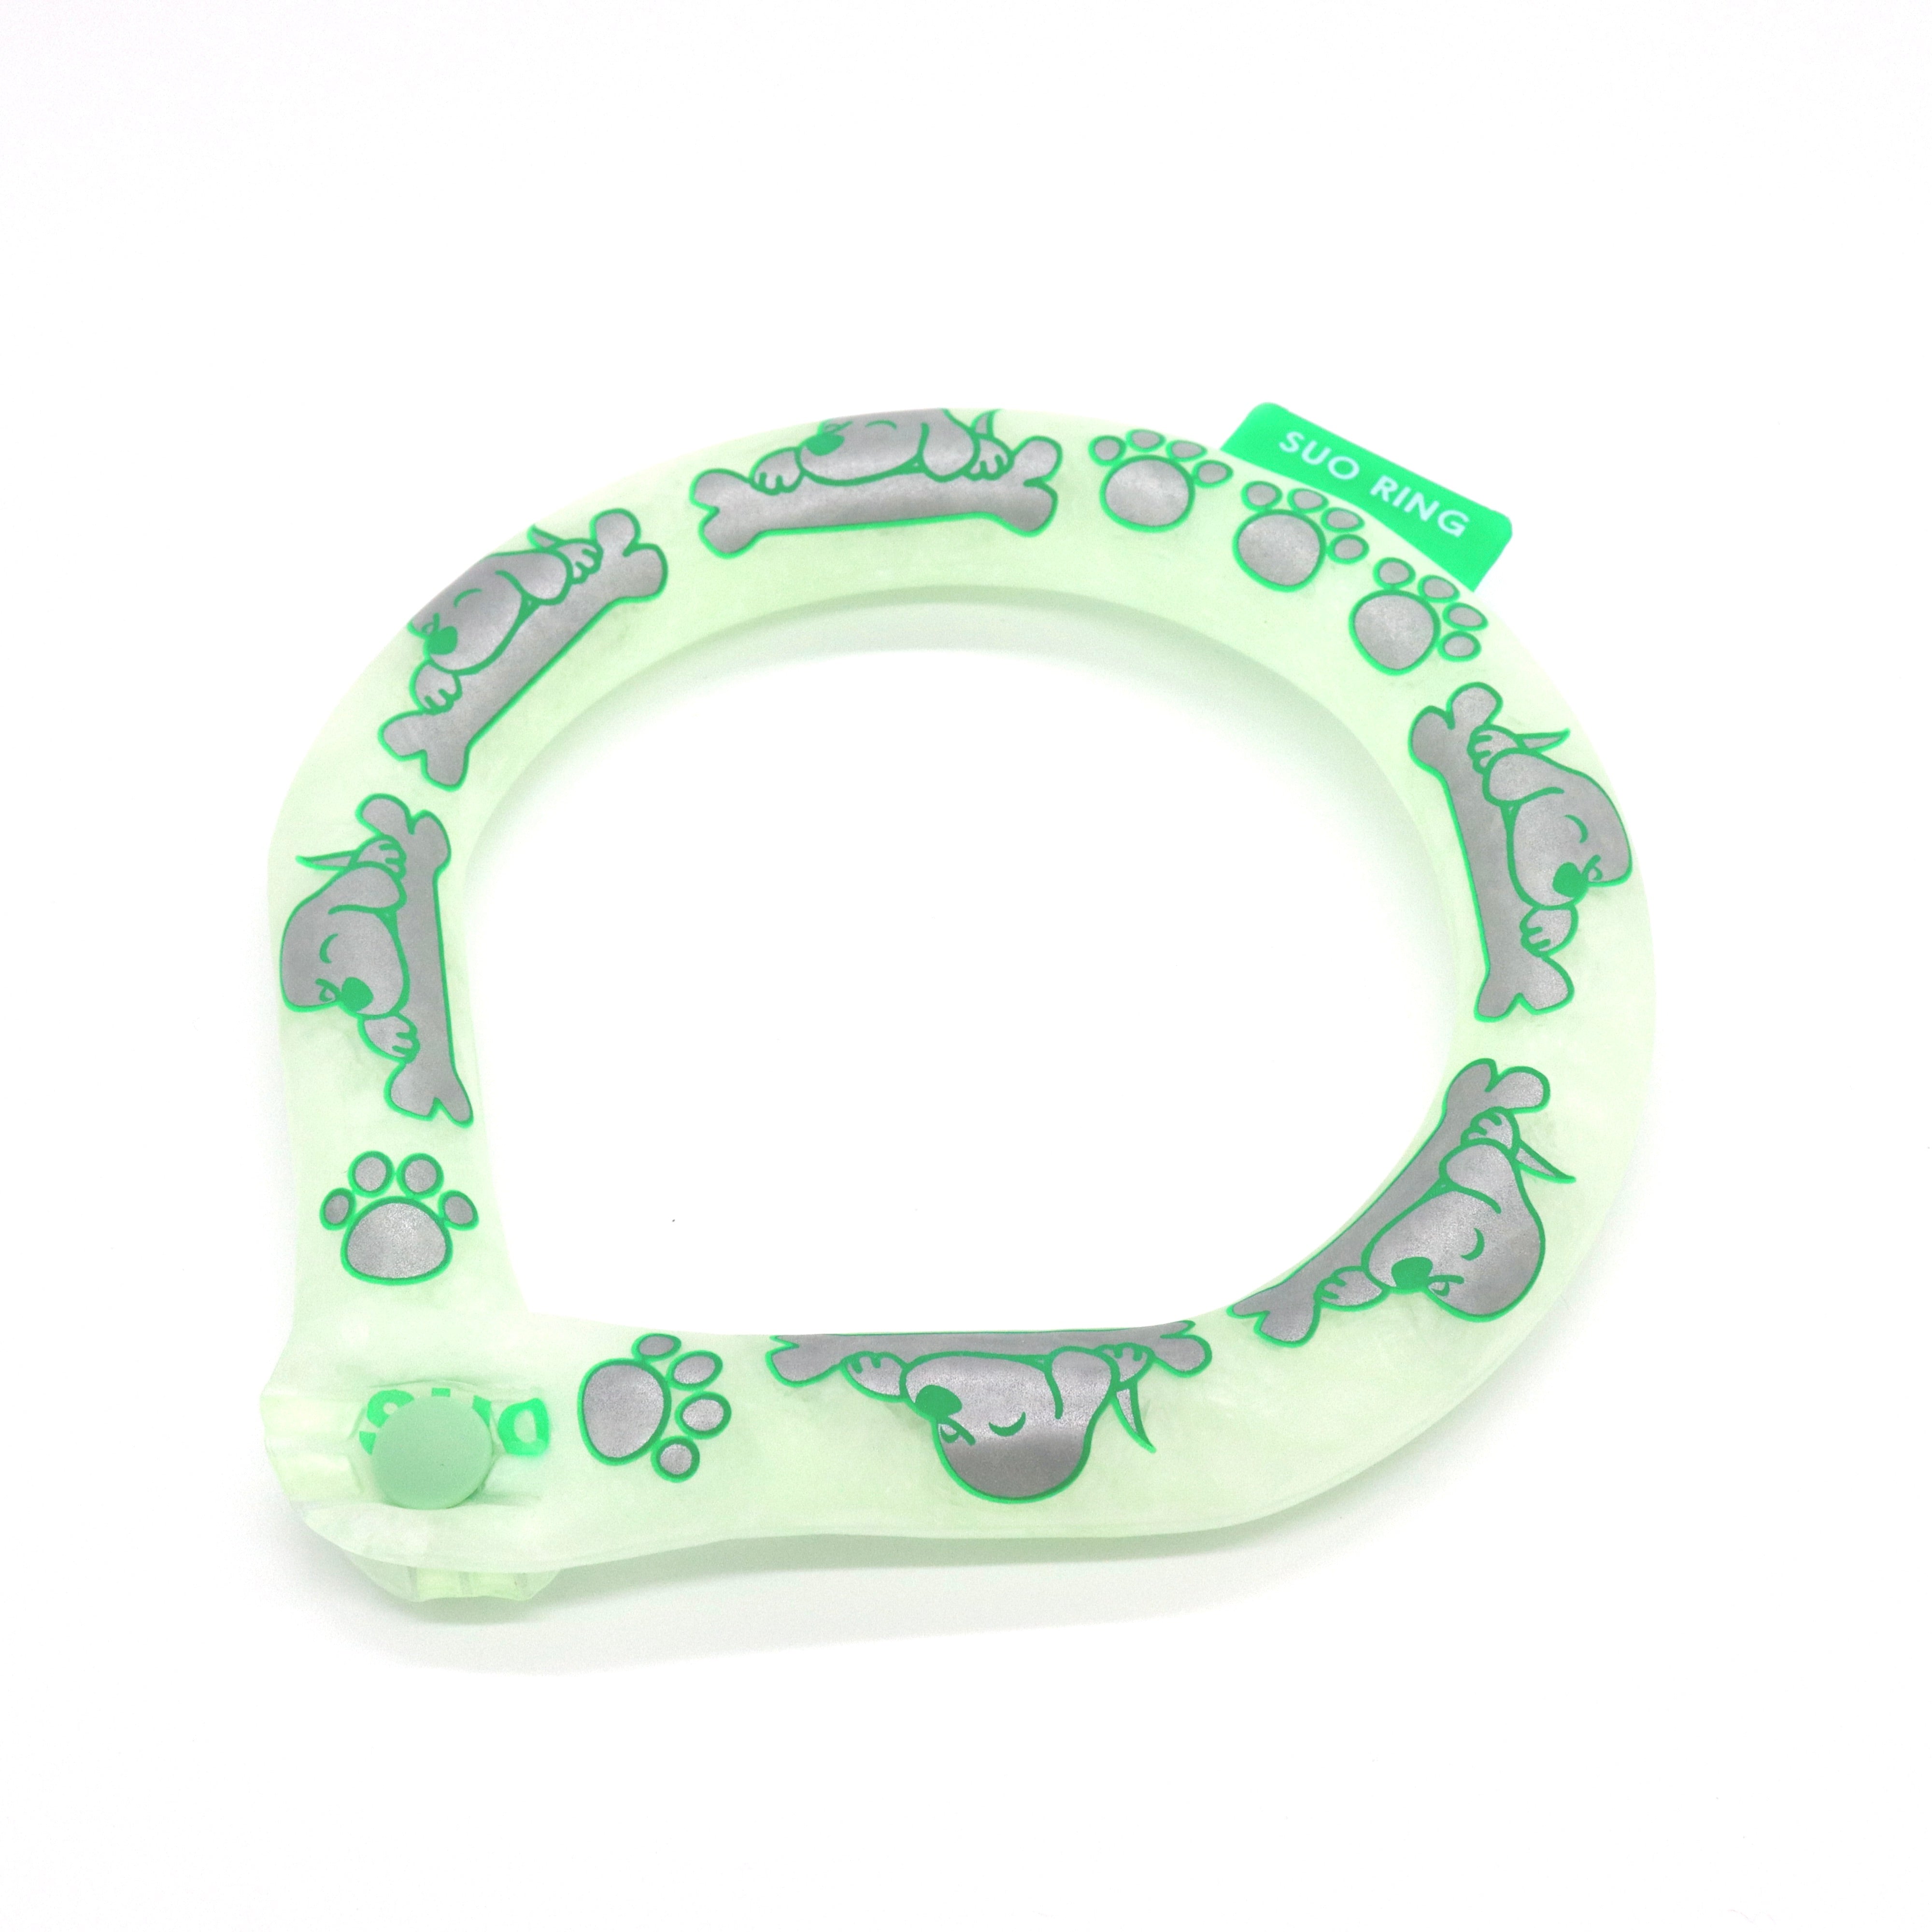 SUO RING for dogs 犬柄 reflector ボタン付